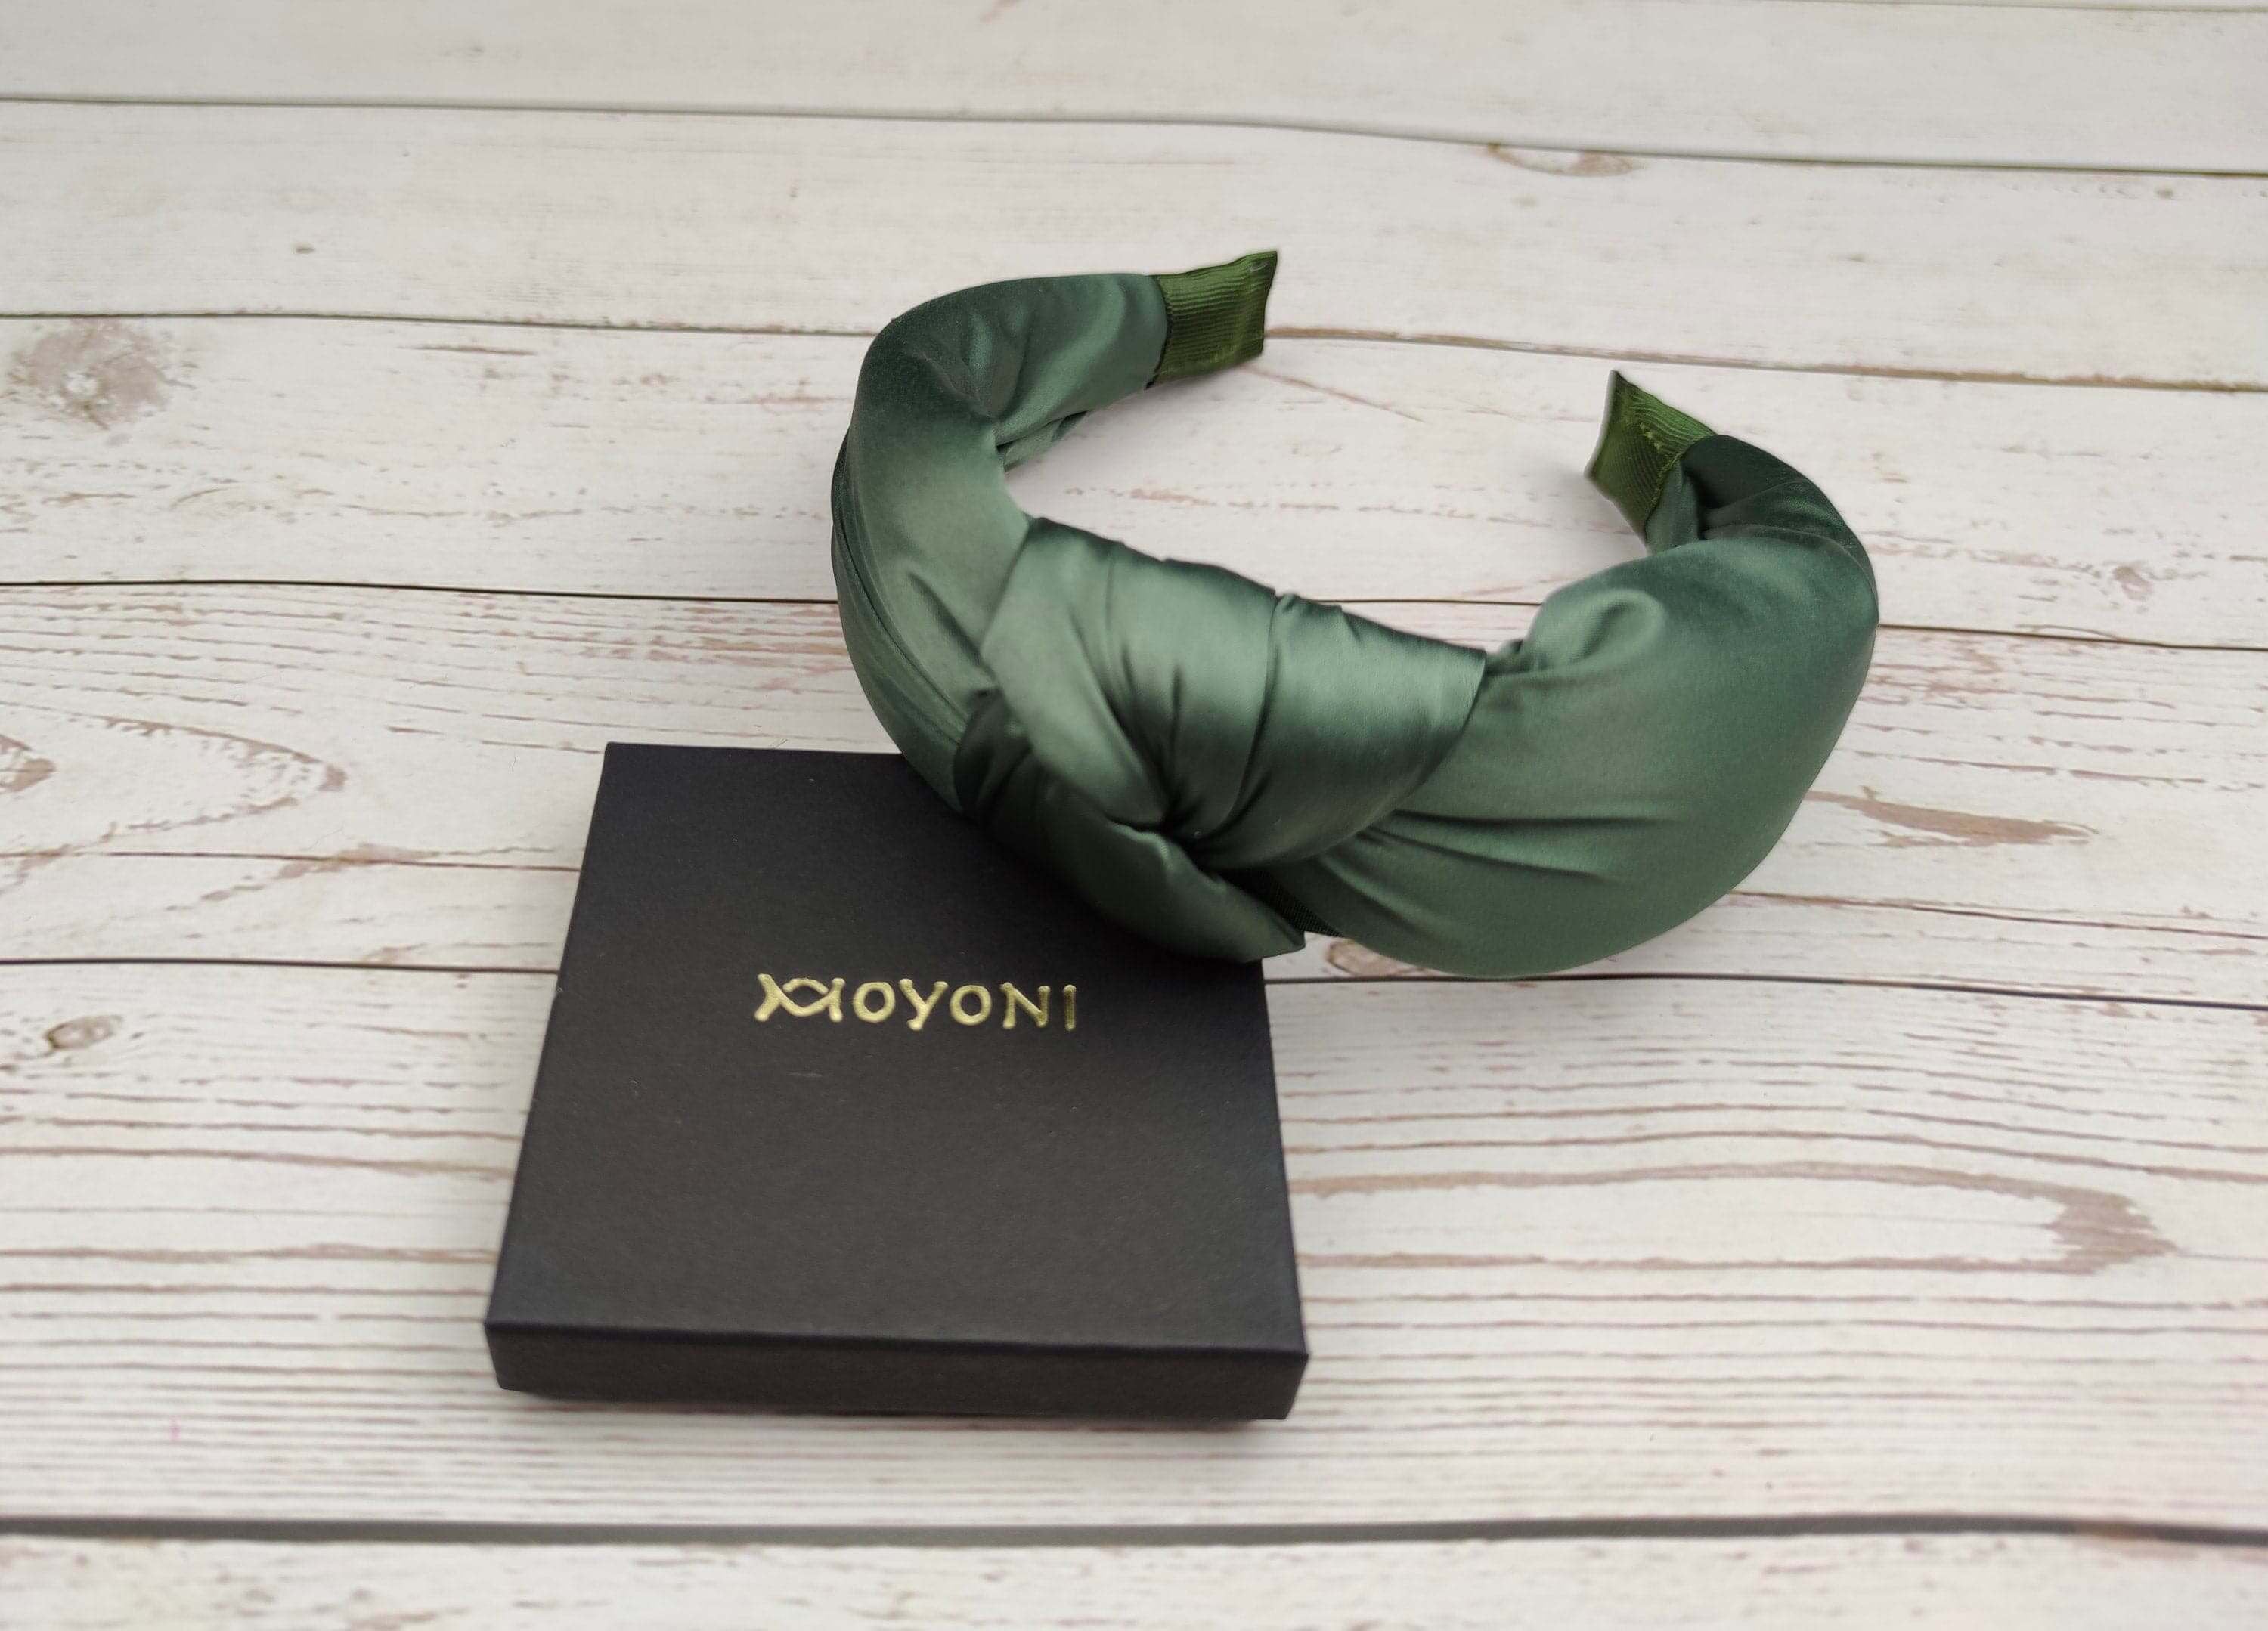 Get into the Christmas spirit with this festive Olive Green color padded satin headband! This headband is made of soft and comfortable satin fabric and will keep your hair looking beautiful all season long.